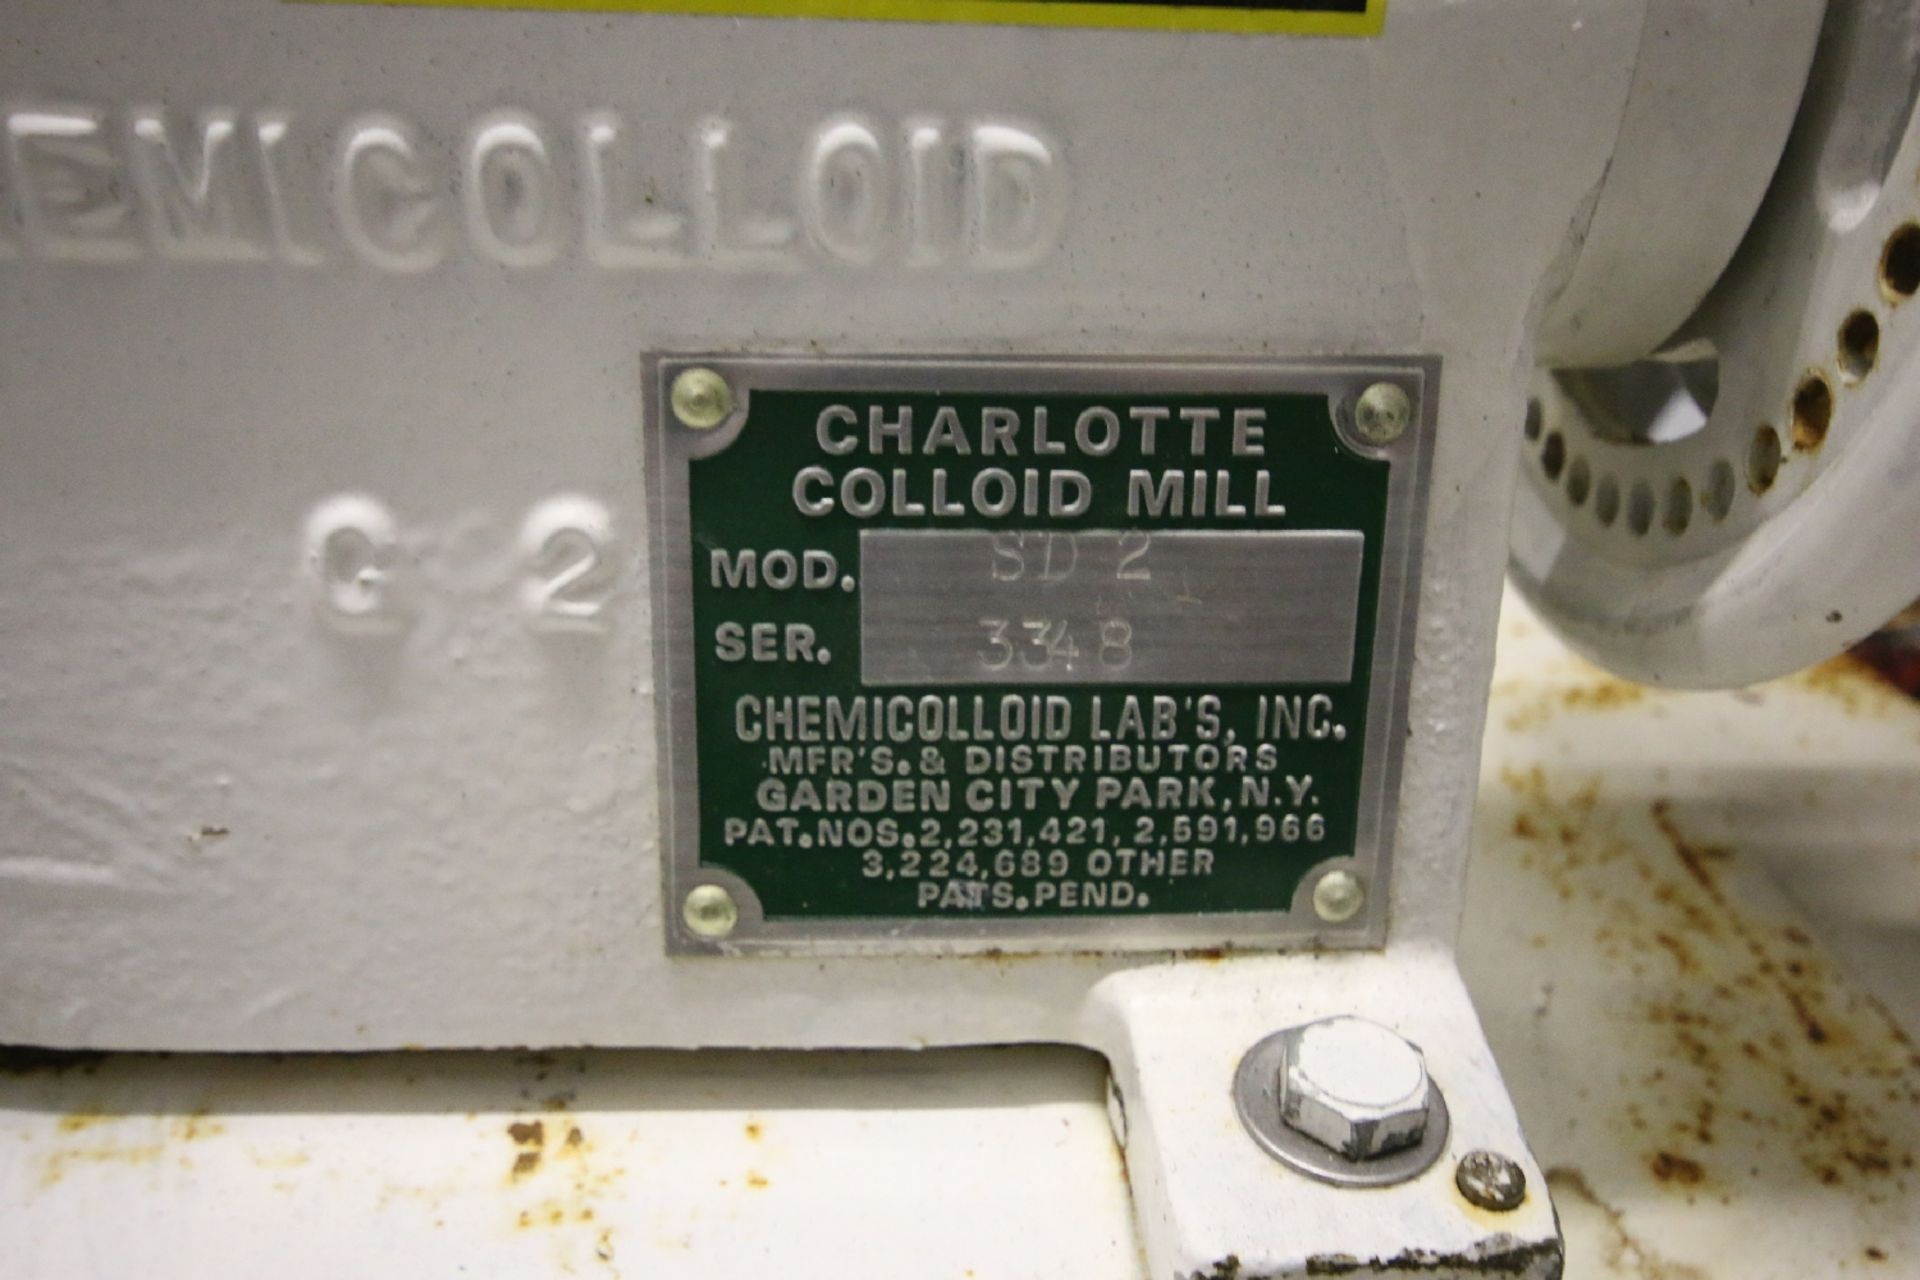 Charlotte S/S Colloid Mill, Model SD2, S/N 3348 with 3 hp Motor and Waukesha Positive Displacement - Image 6 of 7